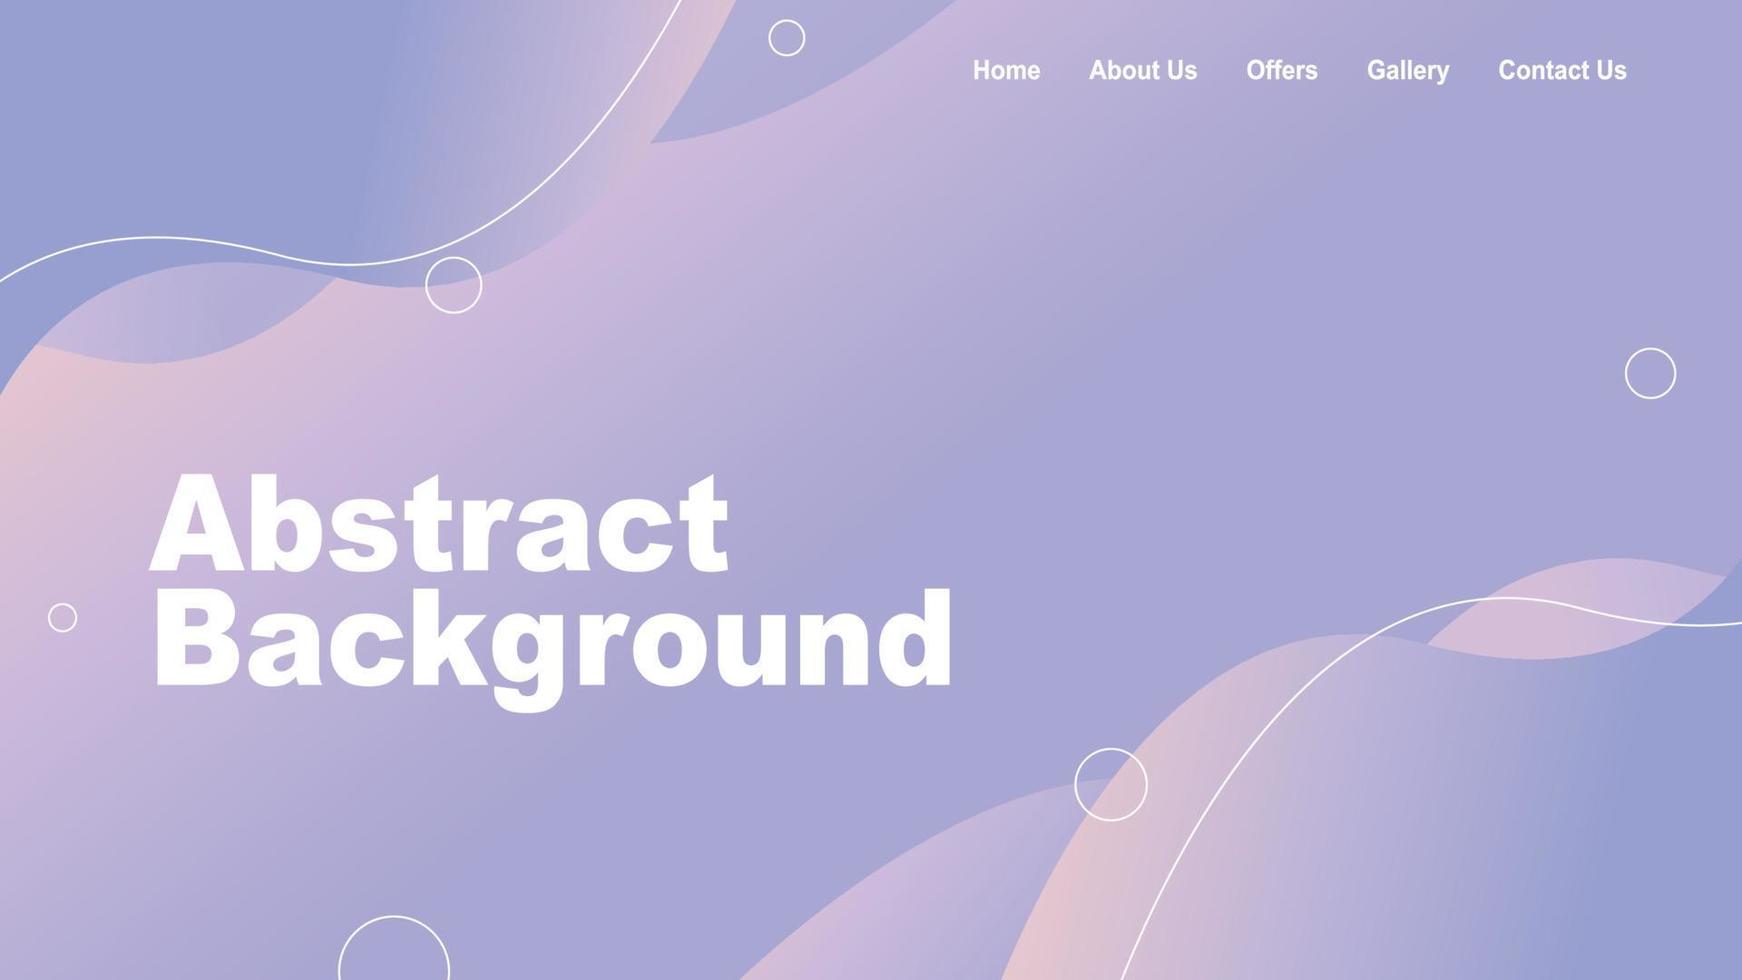 Abstract background website landing page with beautiful neon pastel purple. Free vector